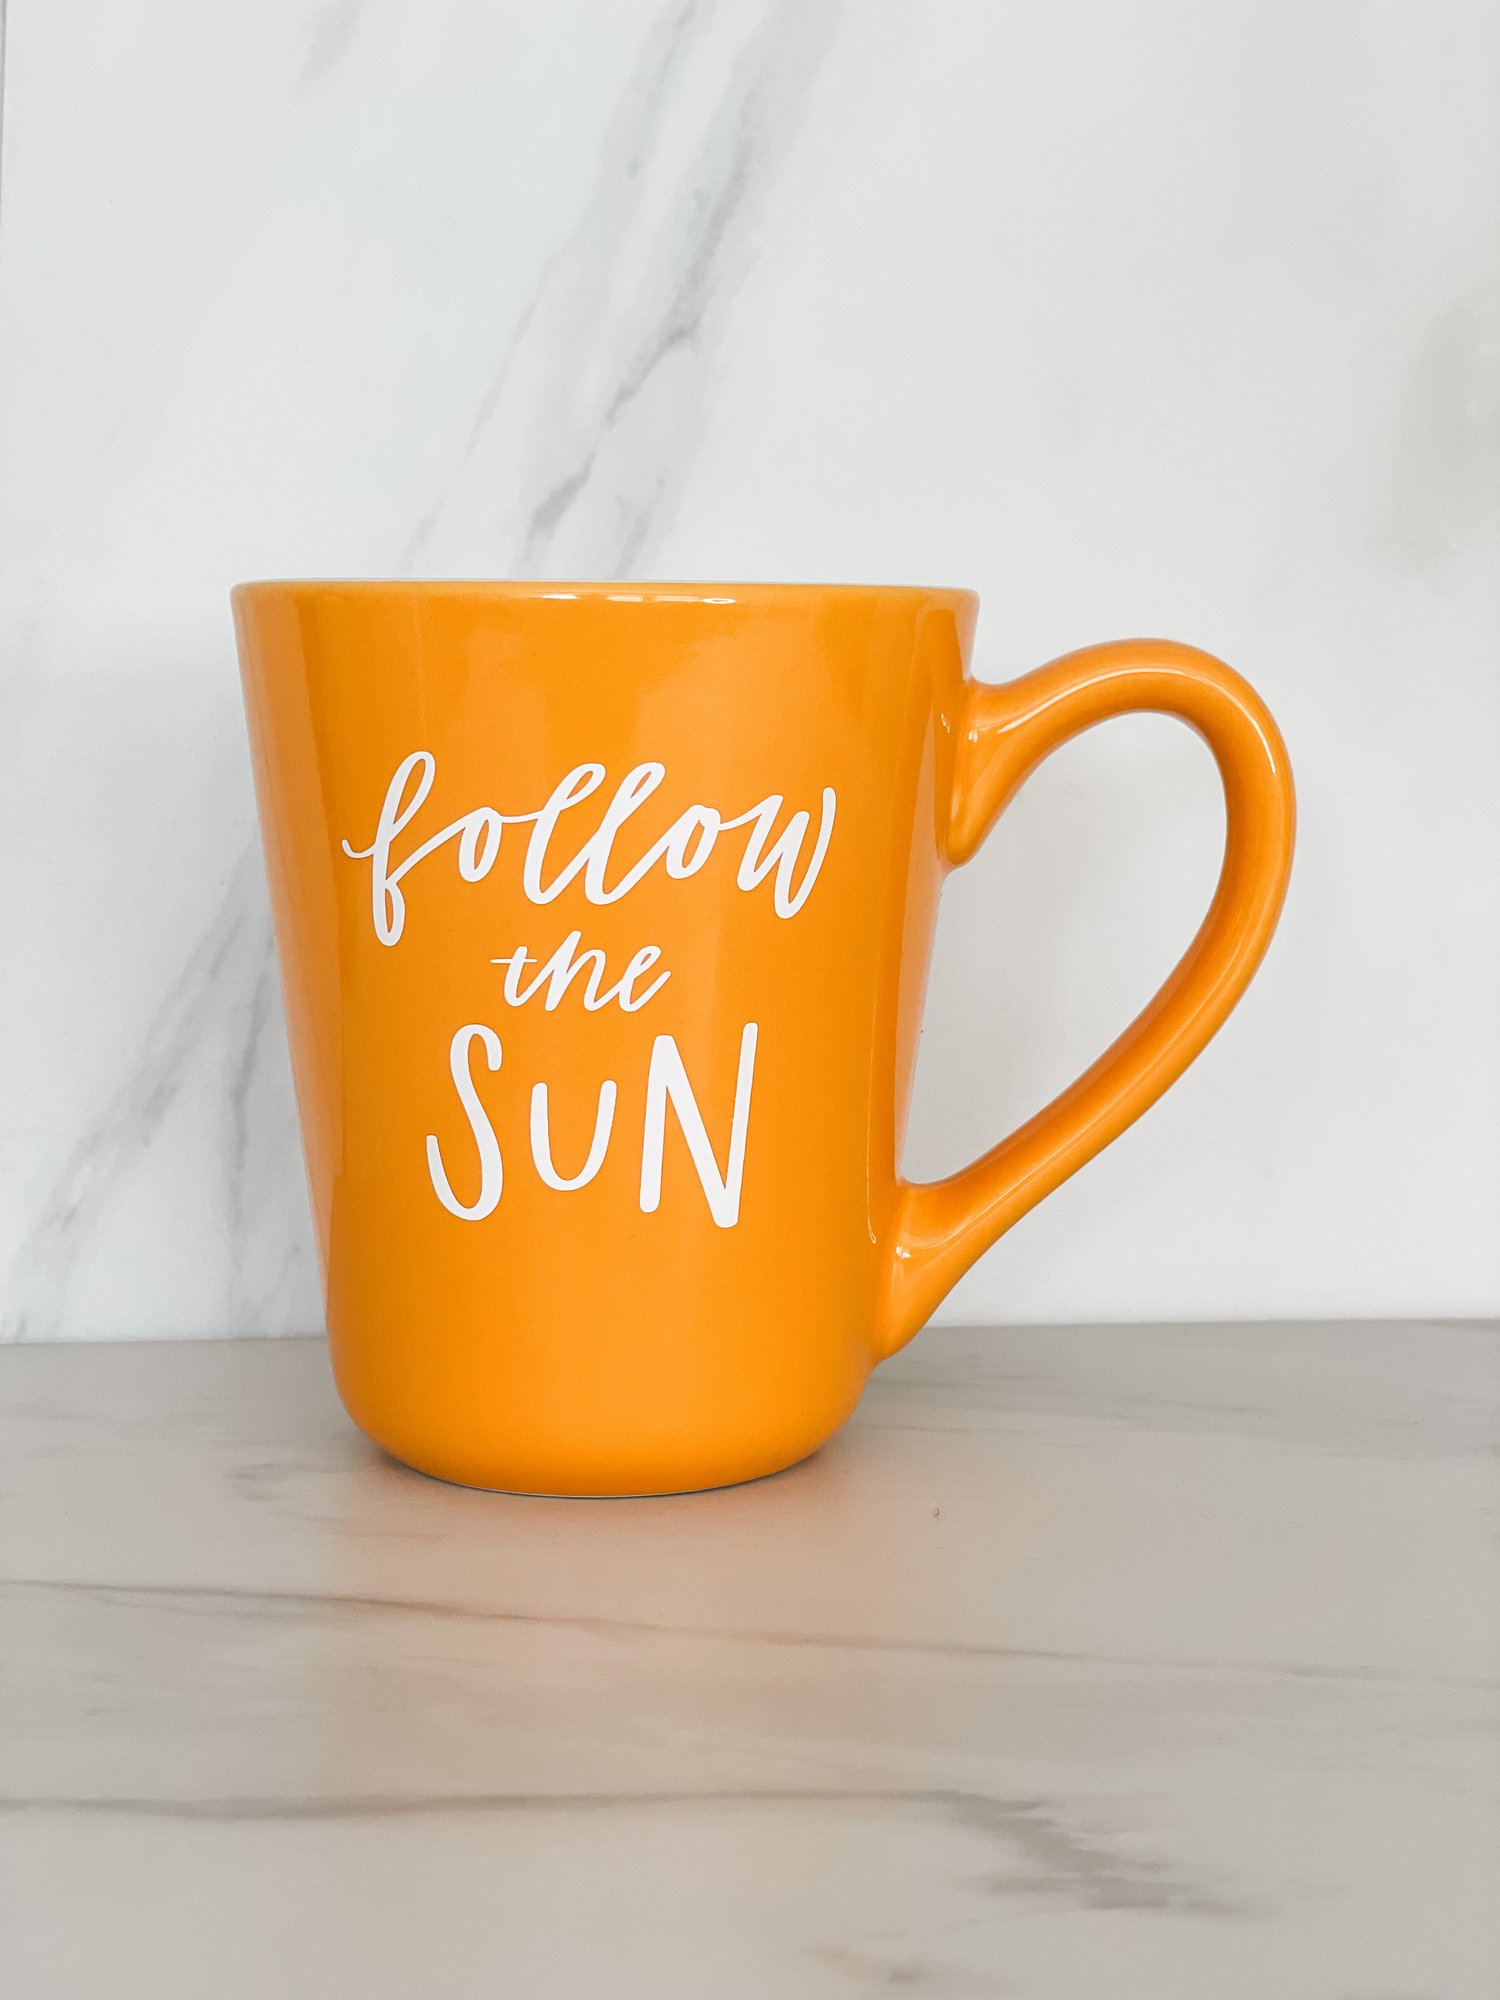 The sun will rise and we will try again - Quote Coffee Mug for Sale by  KarolinaPaz